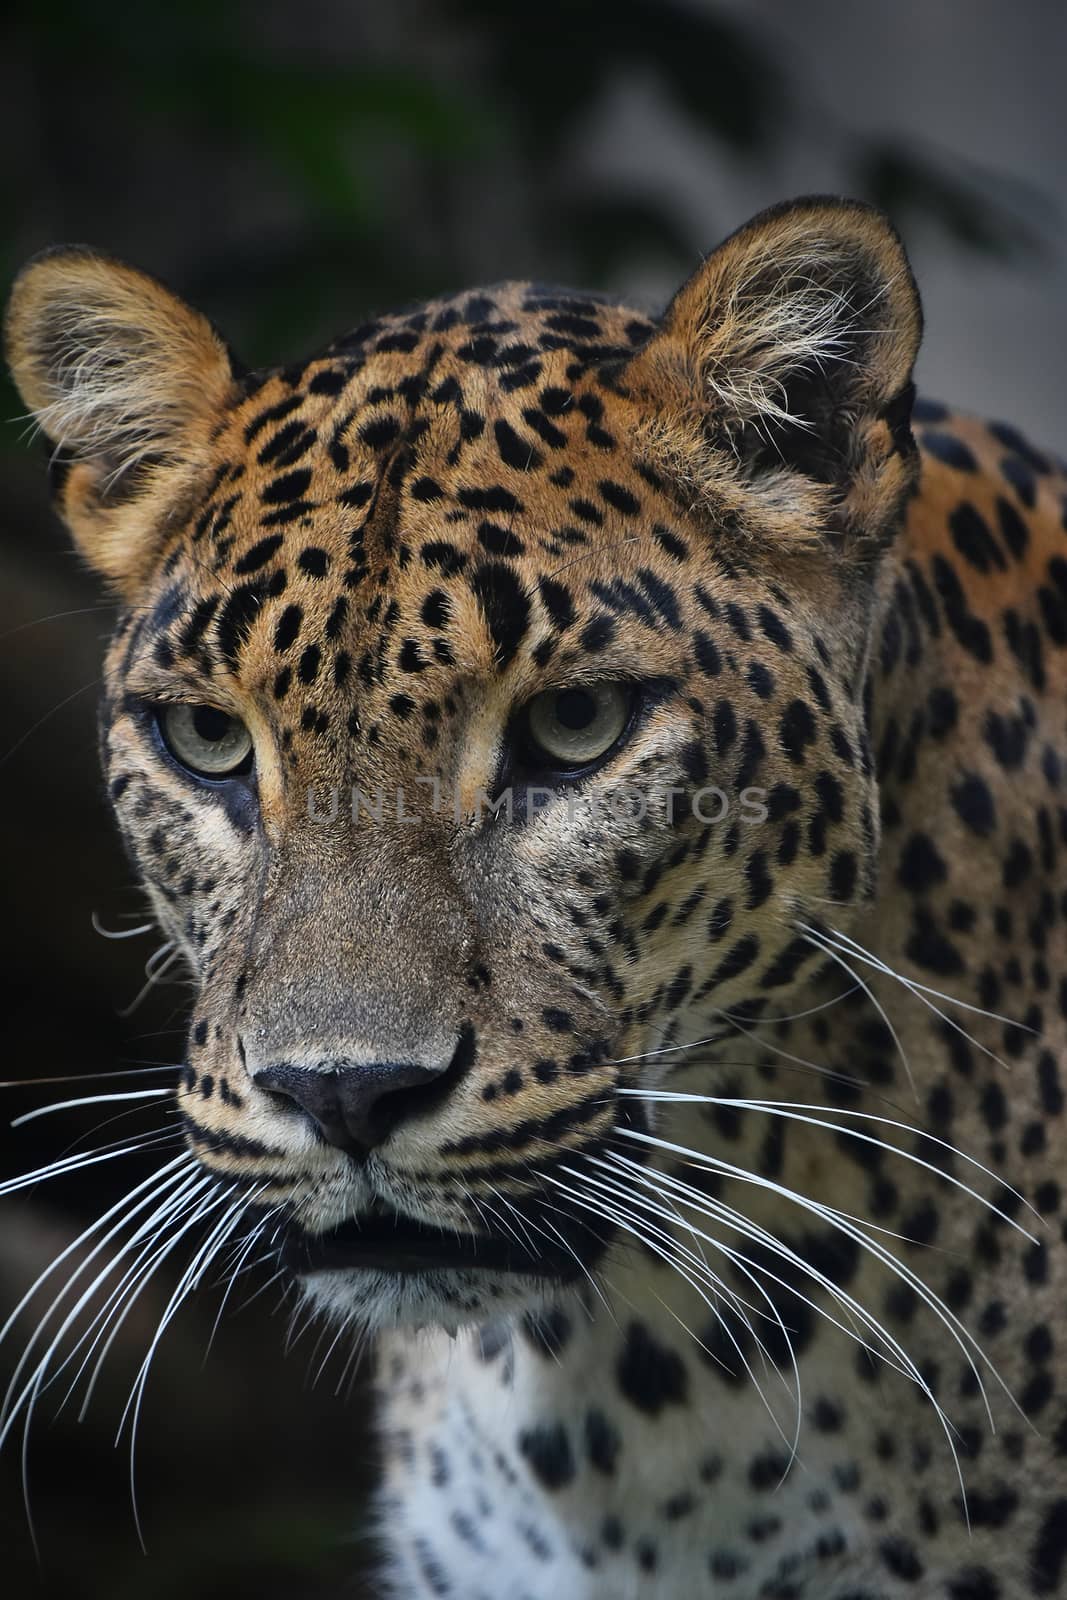 Face to face close up portrait of Persian leopard (Panthera pardus saxicolor) looking at camera, low angle view